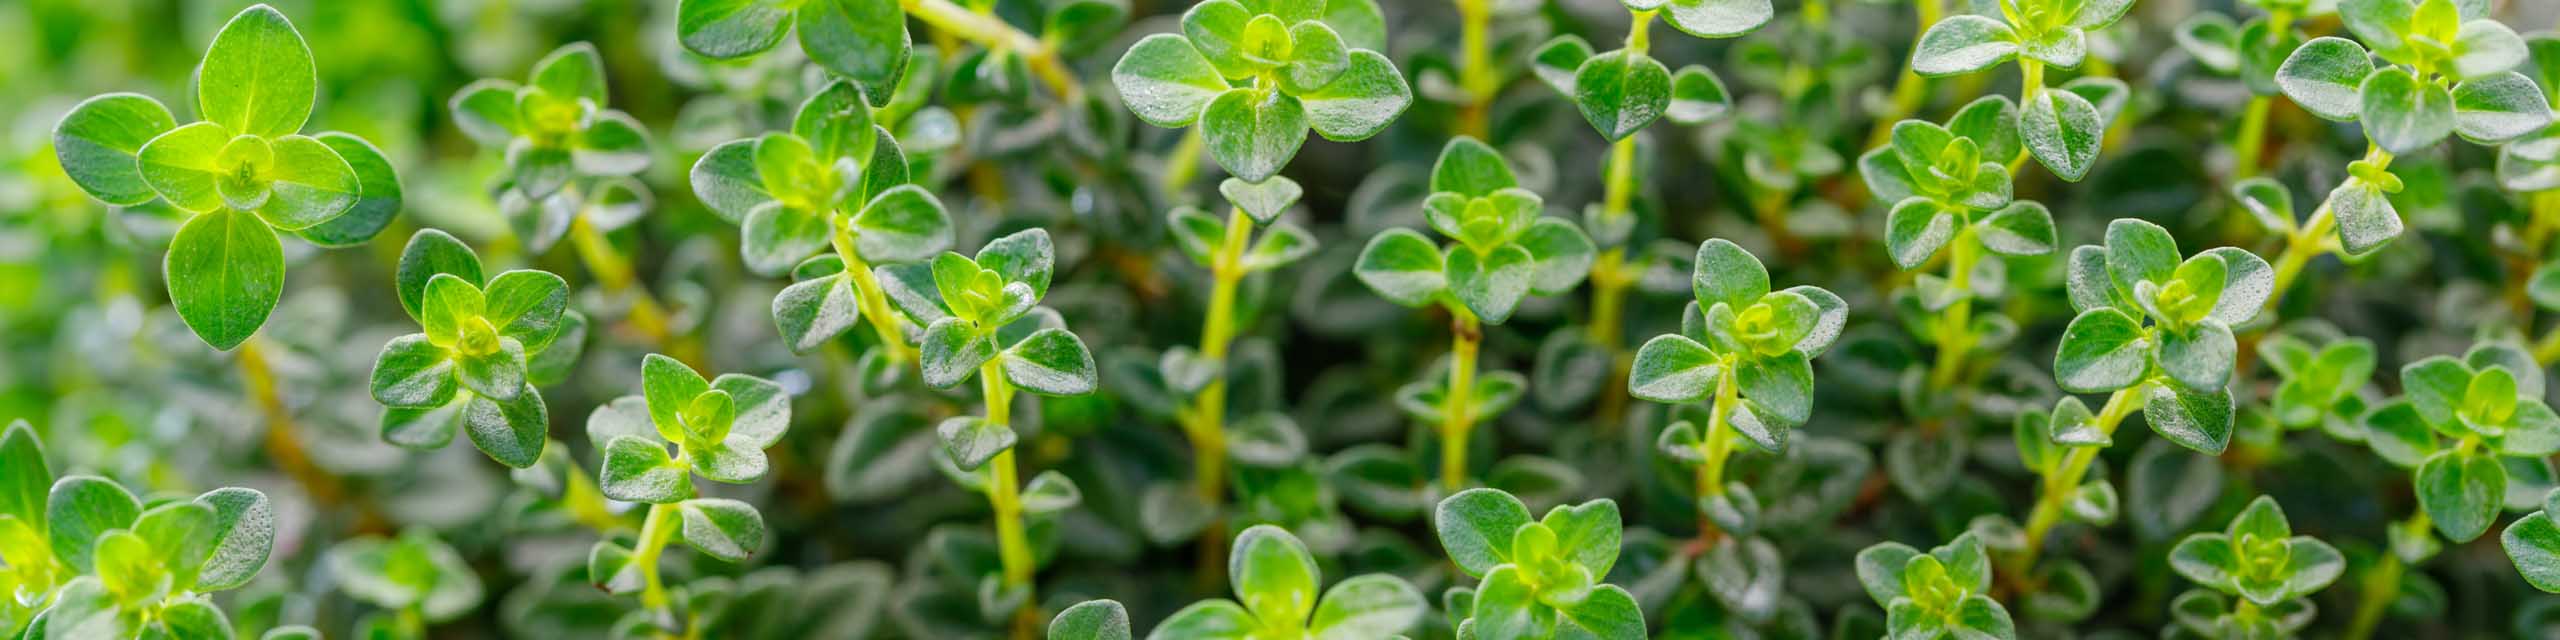 Thyme growing in a herb garden.